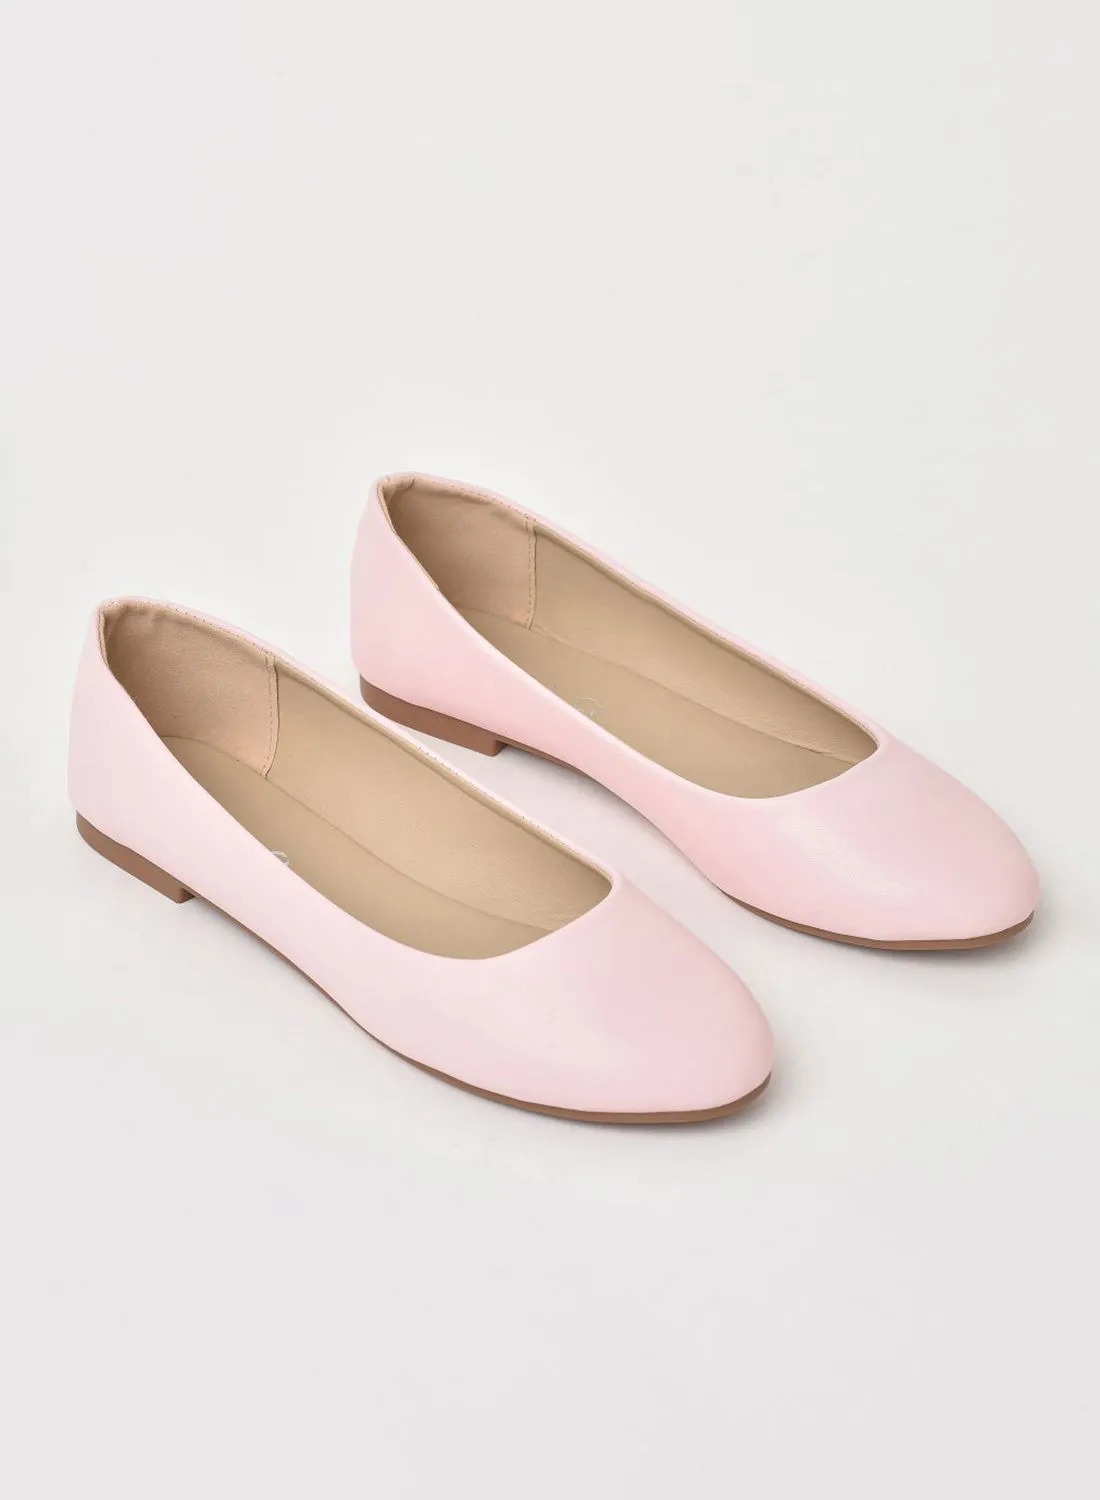 Aila Dyed Ballerina Nude Pink